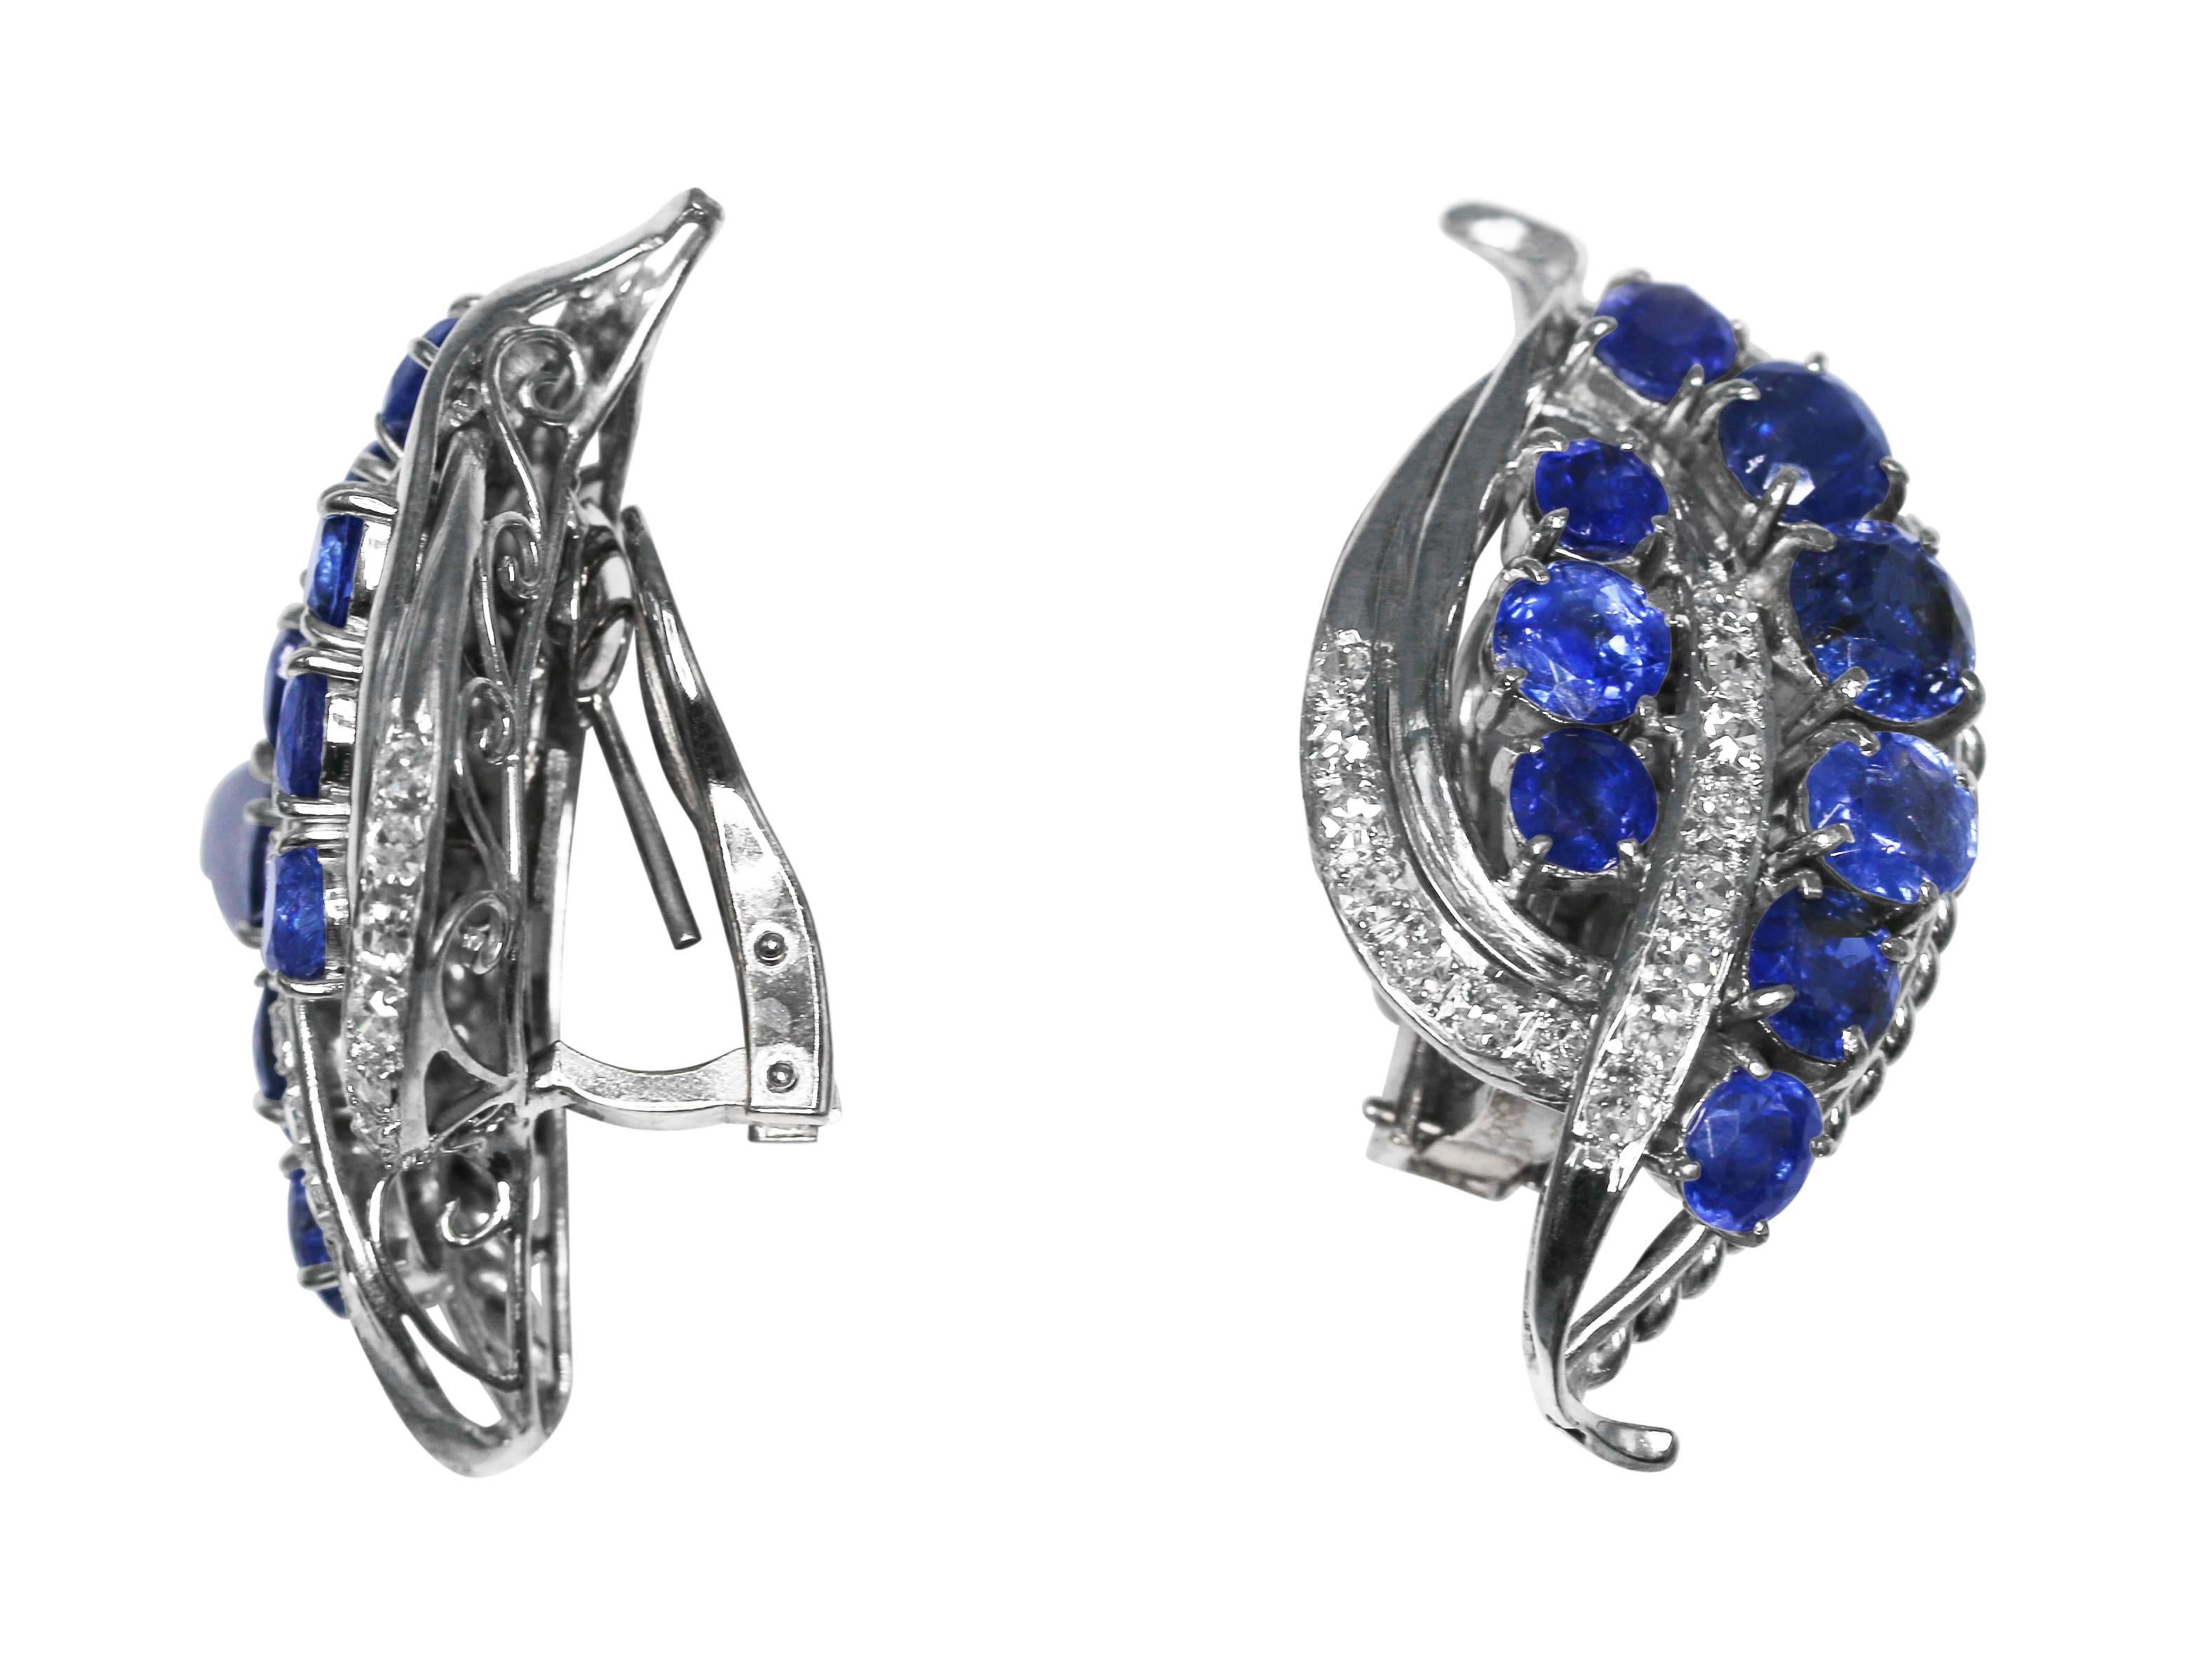 Lovely pair of sapphire and diamond earclips, circa 1950, designed as stylized leaves set with unheated sapphires weighing approximately 12.75 carats, accented by round diamonds weighing approximately 0.75 carat, mounted in 18 karat and 14 karat